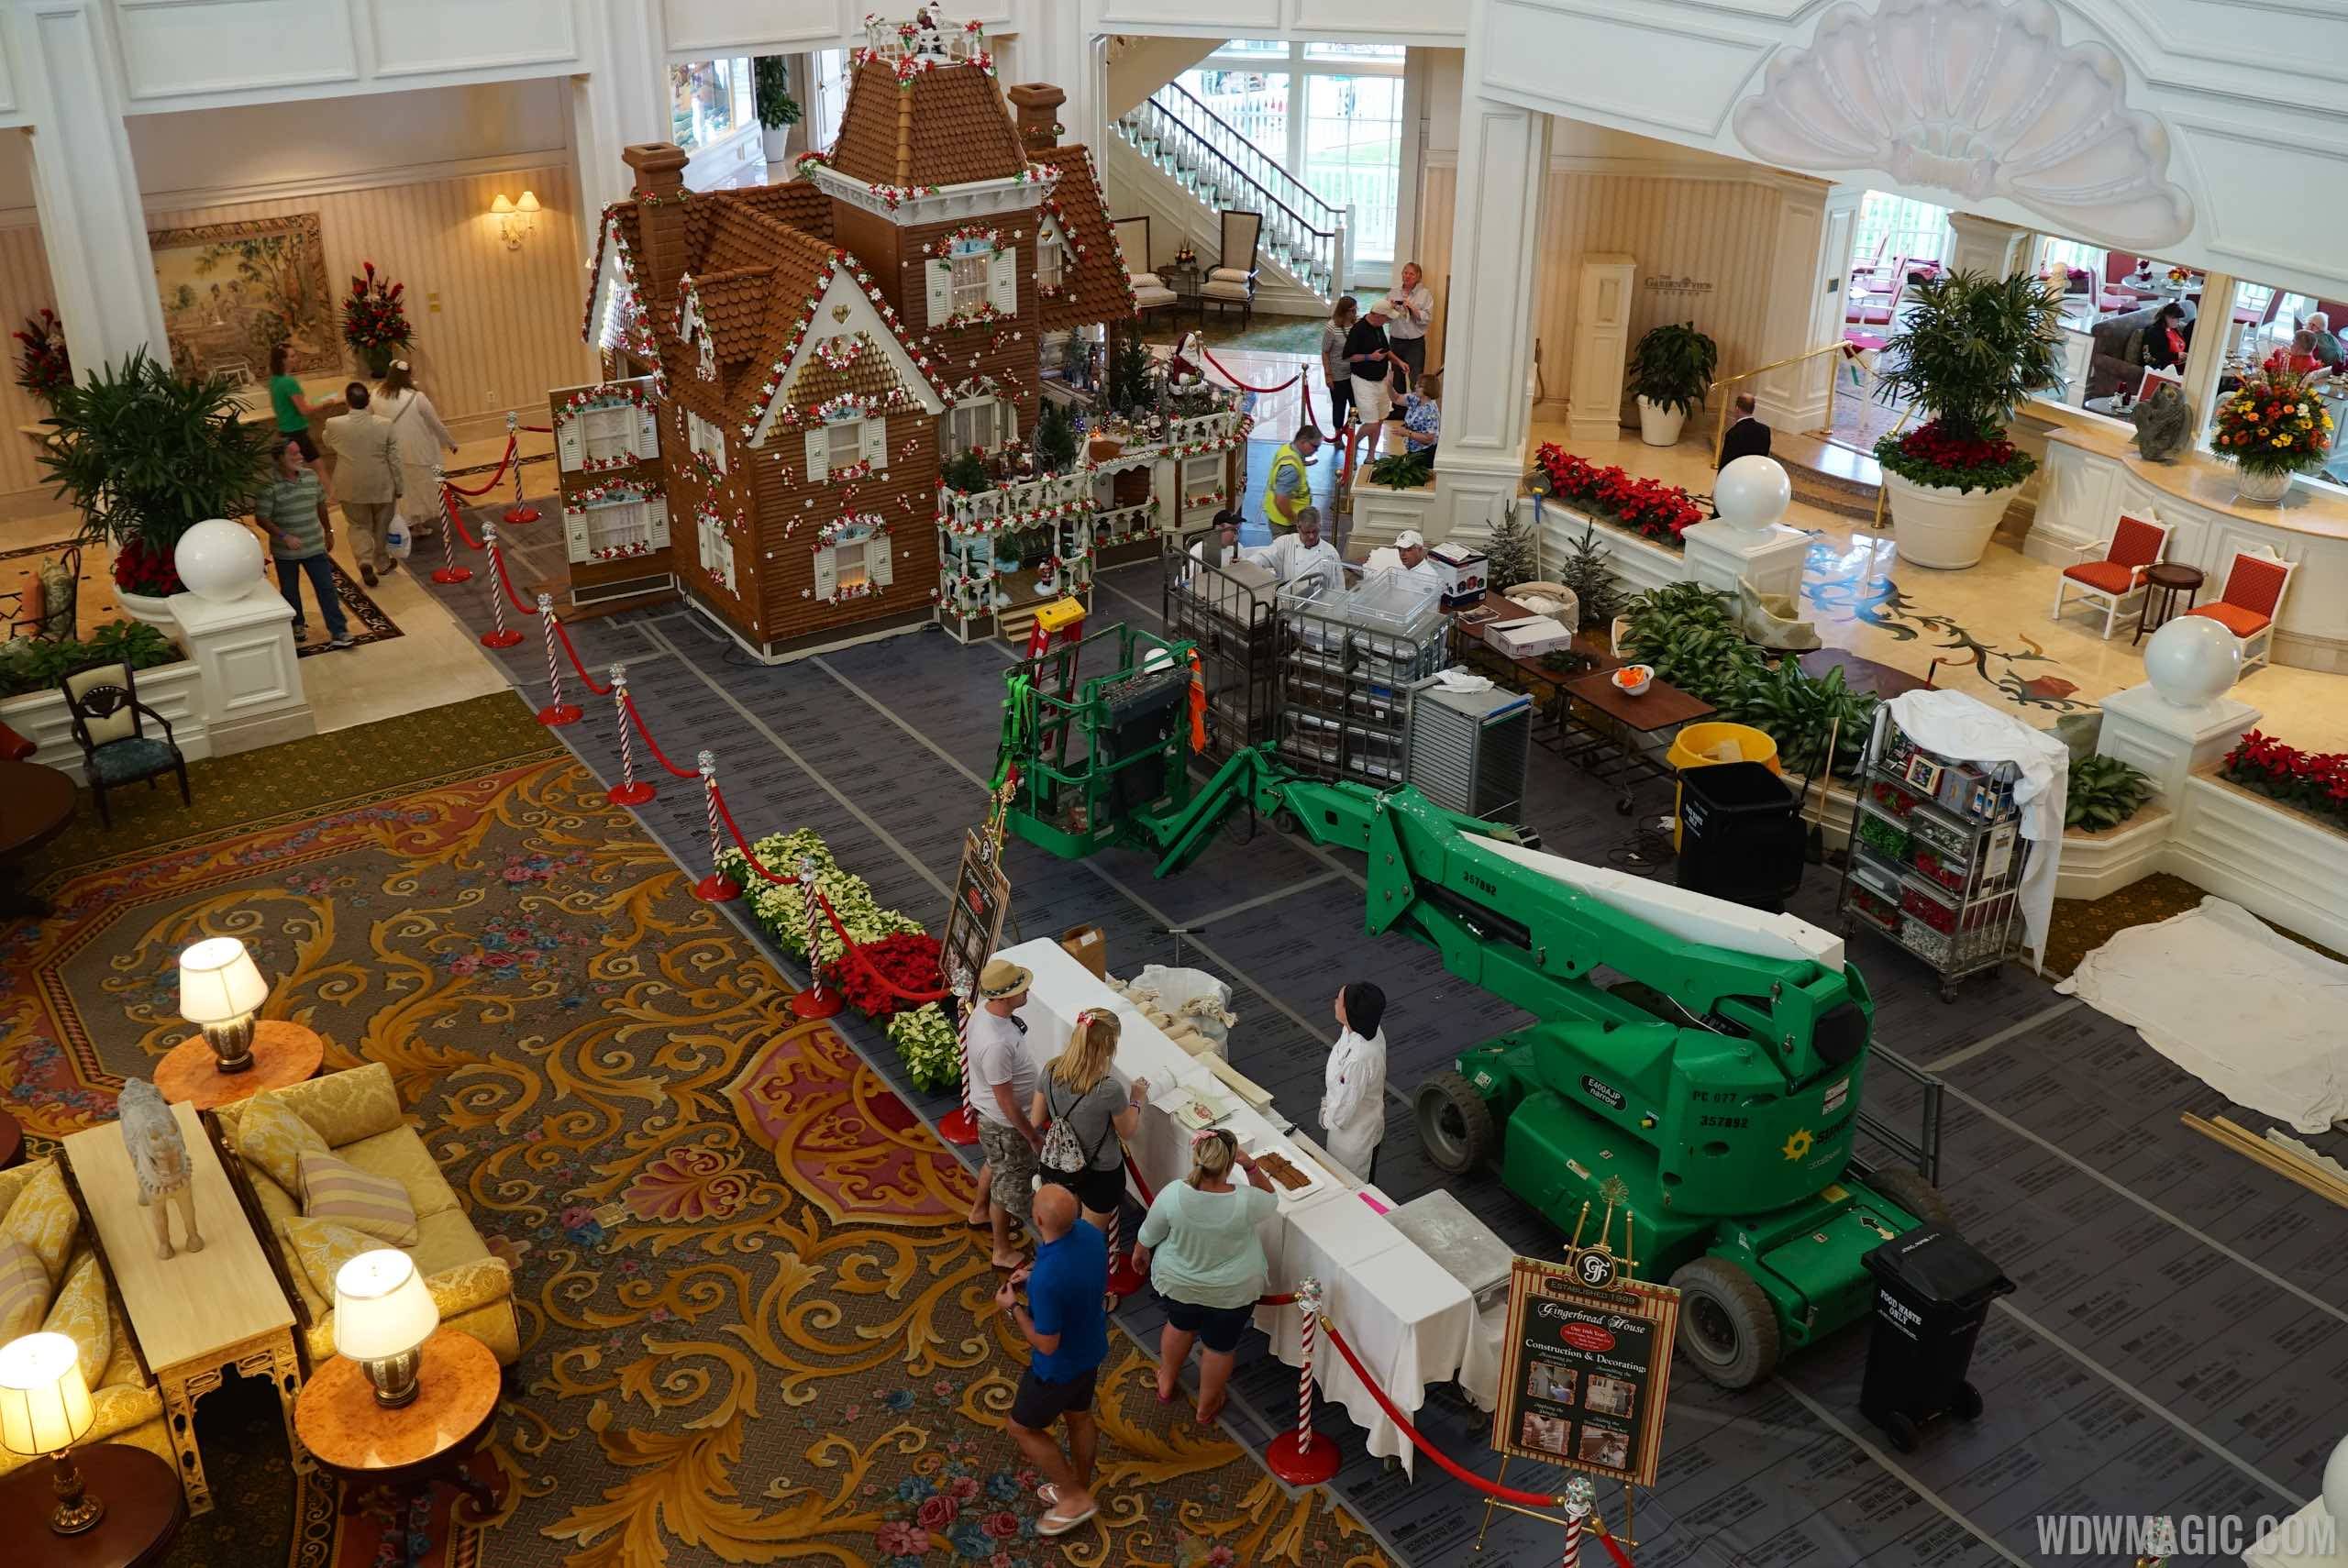 Finishing touches on the Grand Floridian Gingerbread House